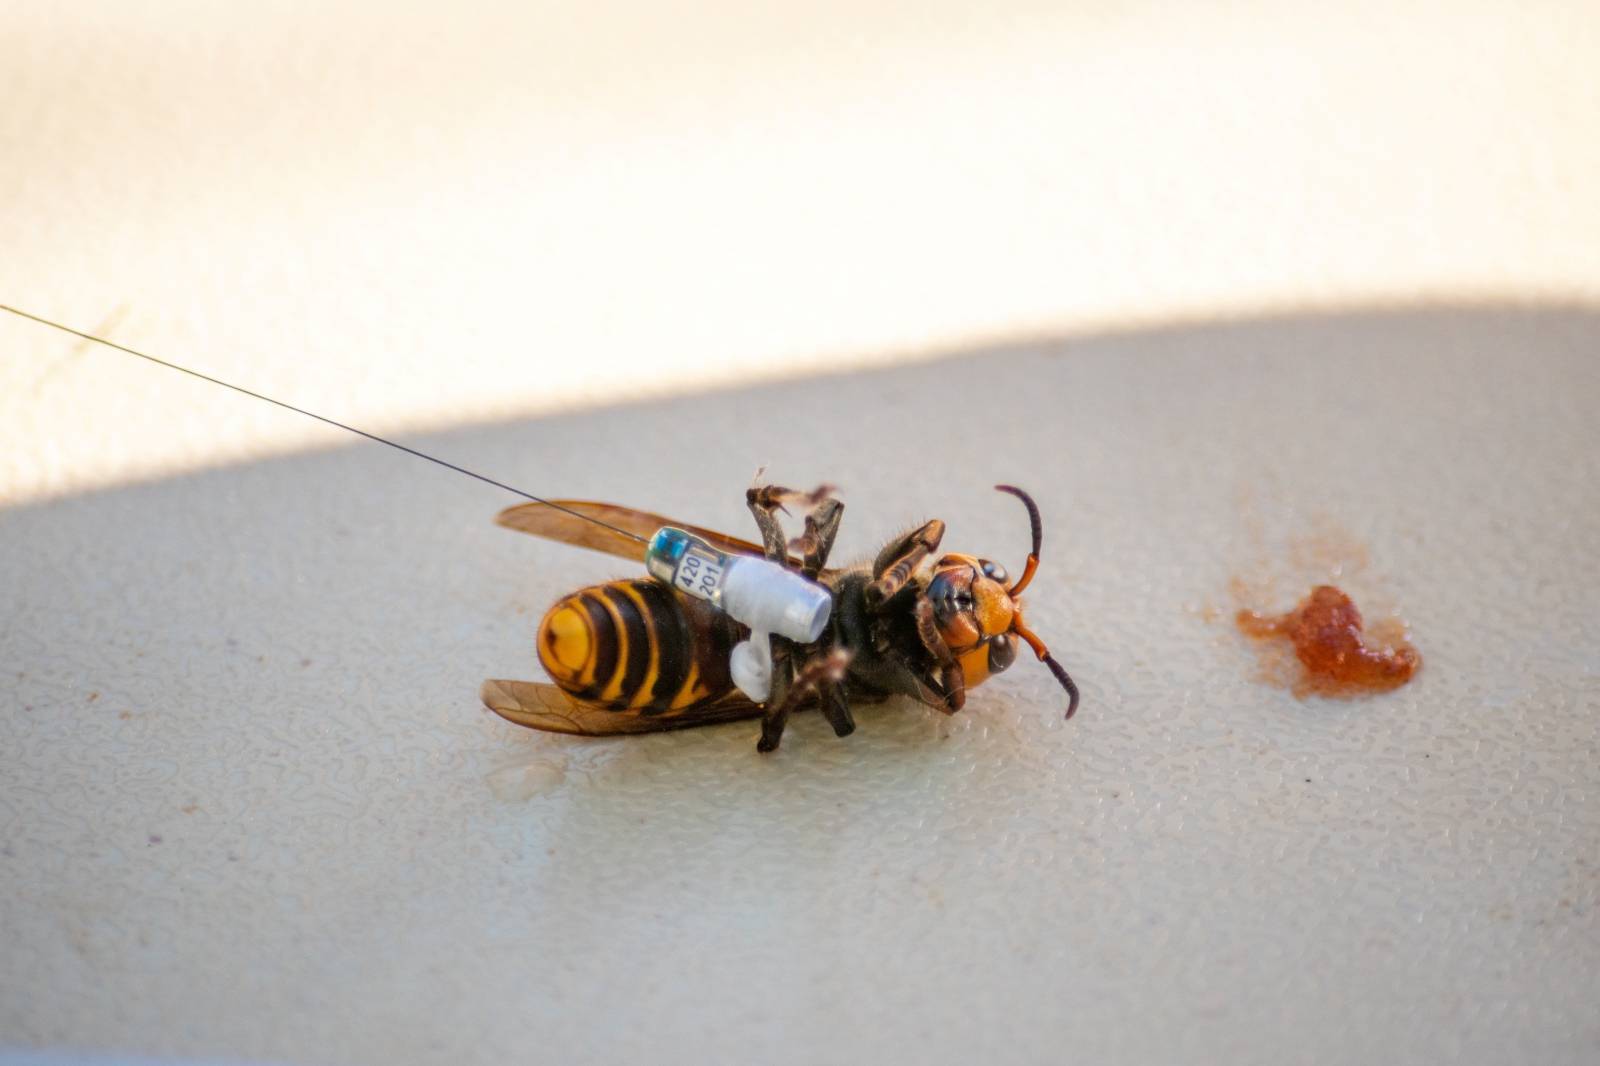 A radio tracking device fitted by Washington State Department of Agriculture (WSDA) entomologists is seen on an Asian giant hornet near Blaine